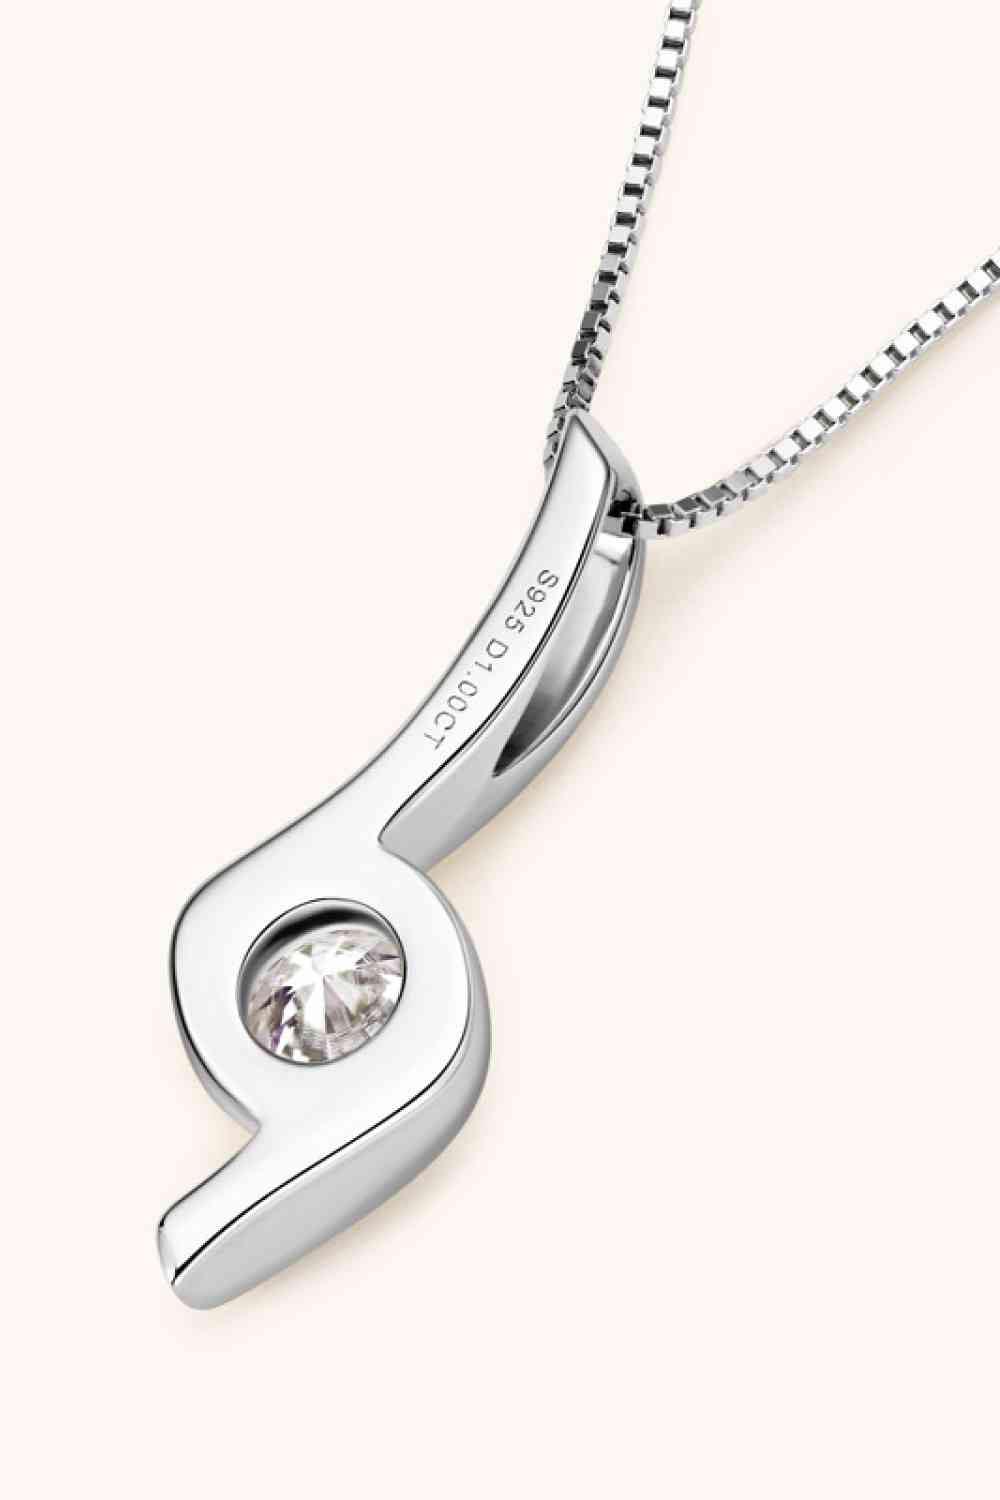 1 Carat Moissanite Drop Pendant 925 Sterling Silver Necklace - God's Girl Gifts And Apparel